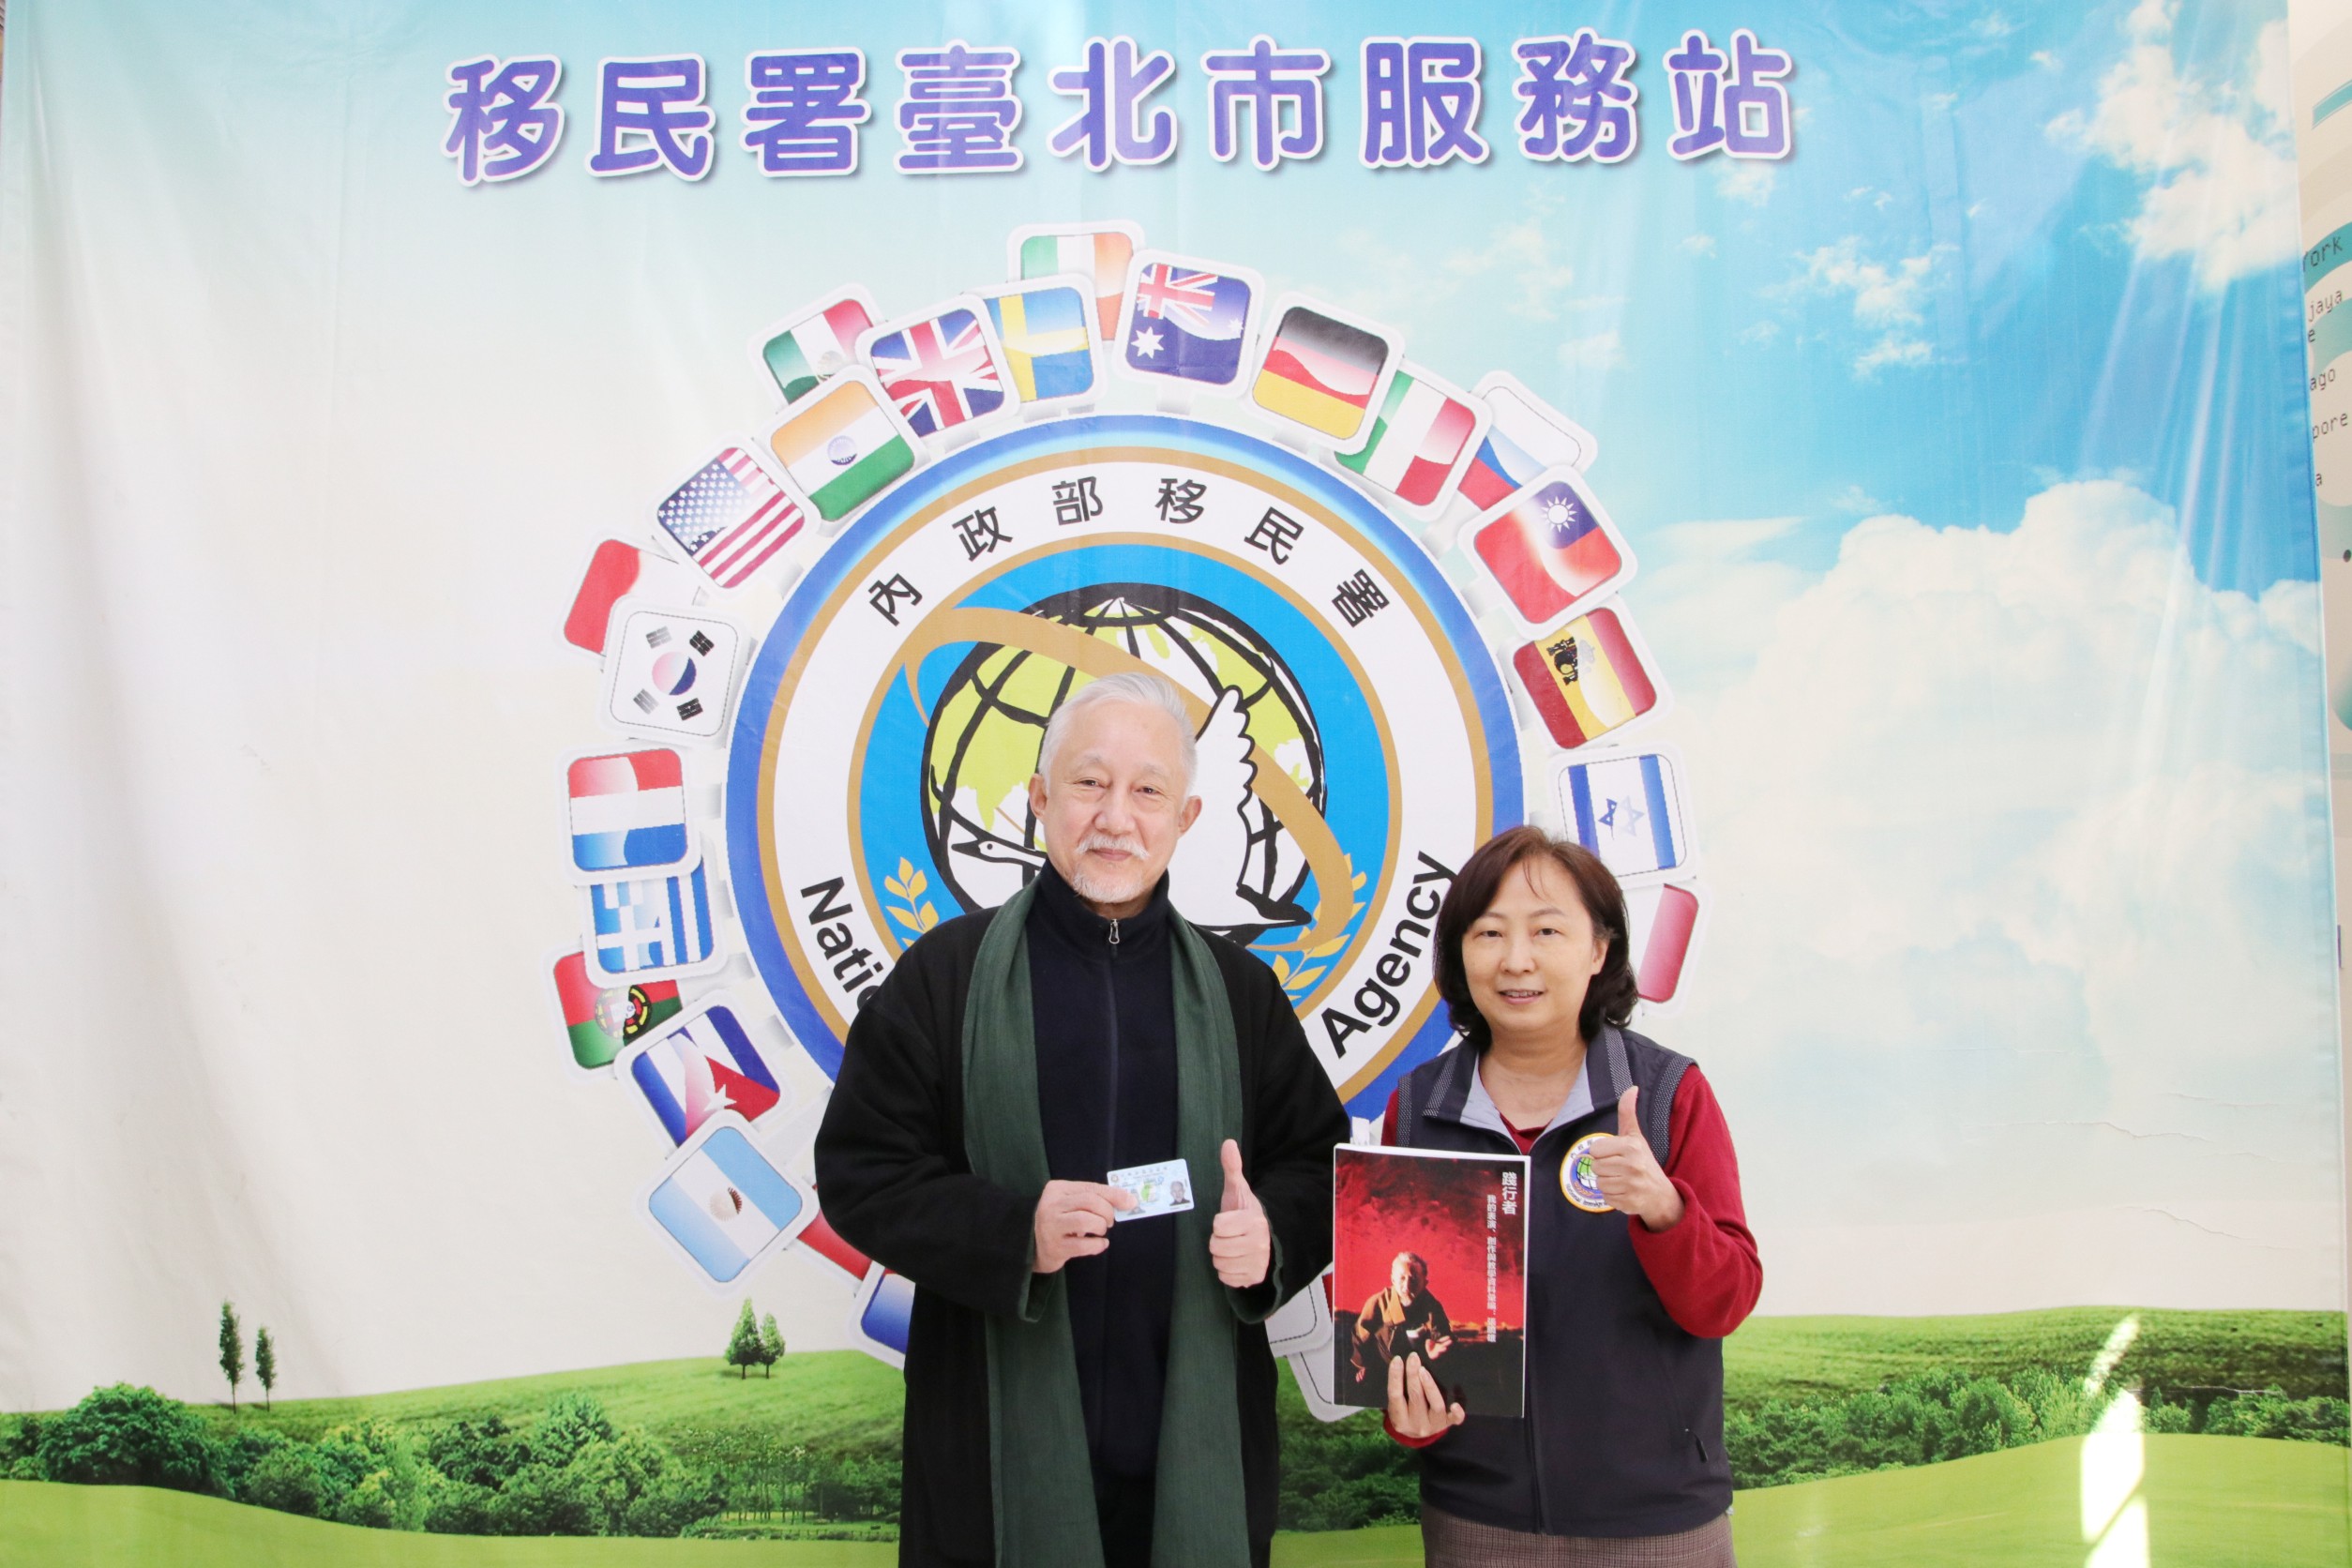 Chang, Hsiao-Hsiung, Australian Dance Professor to Obtain the Plum Blossom Card Picture reproduced from National Immigration Agency 